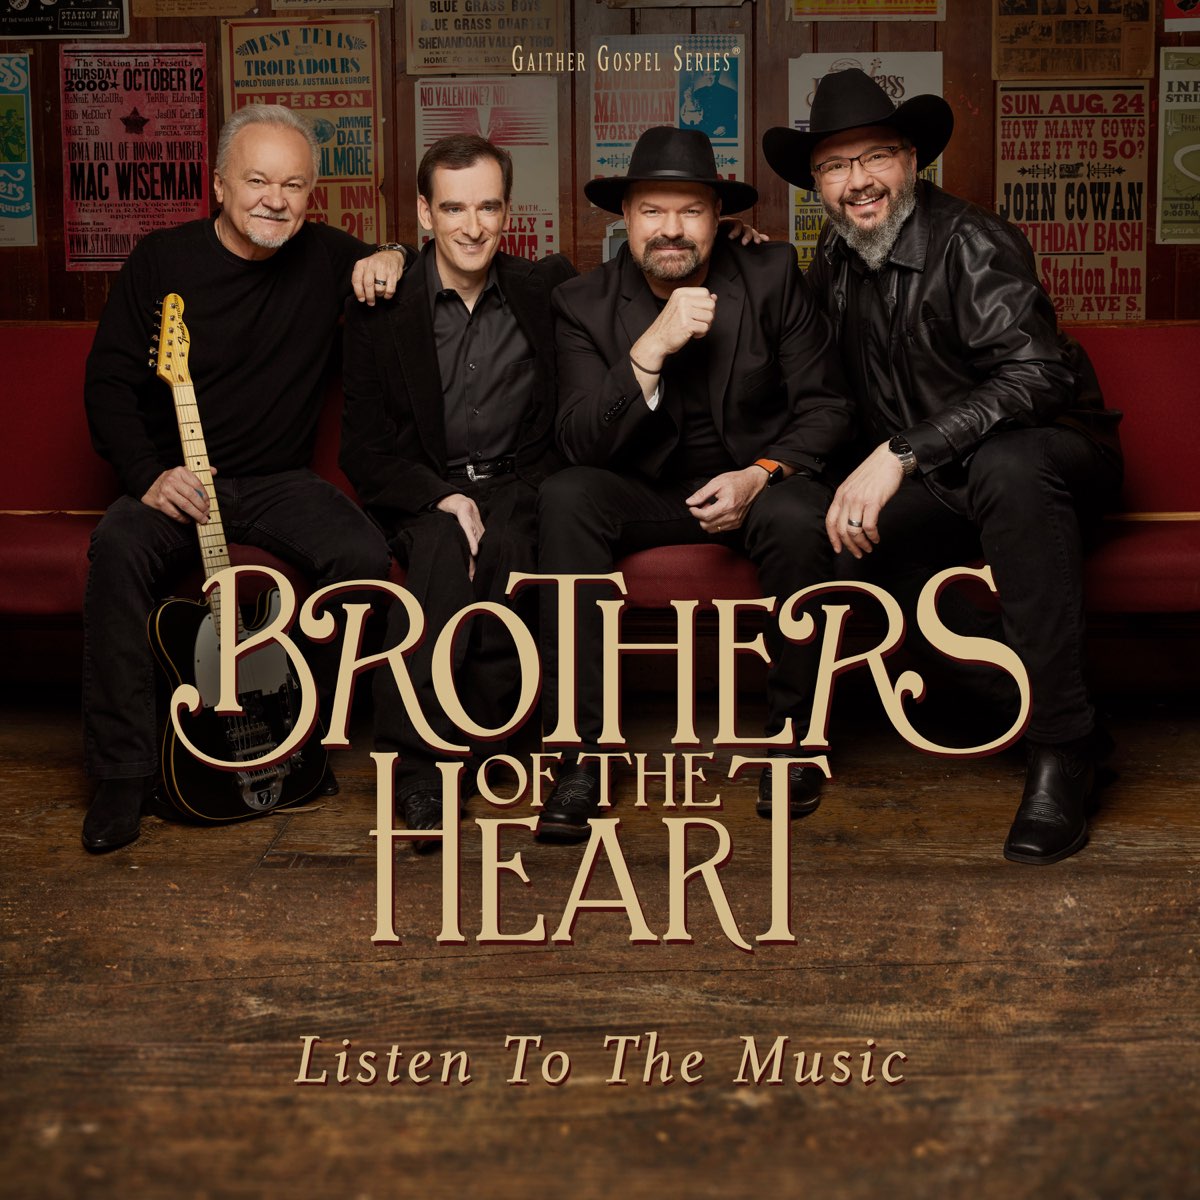 ‎Listen To The Music by Brothers of the Heart on Apple Music